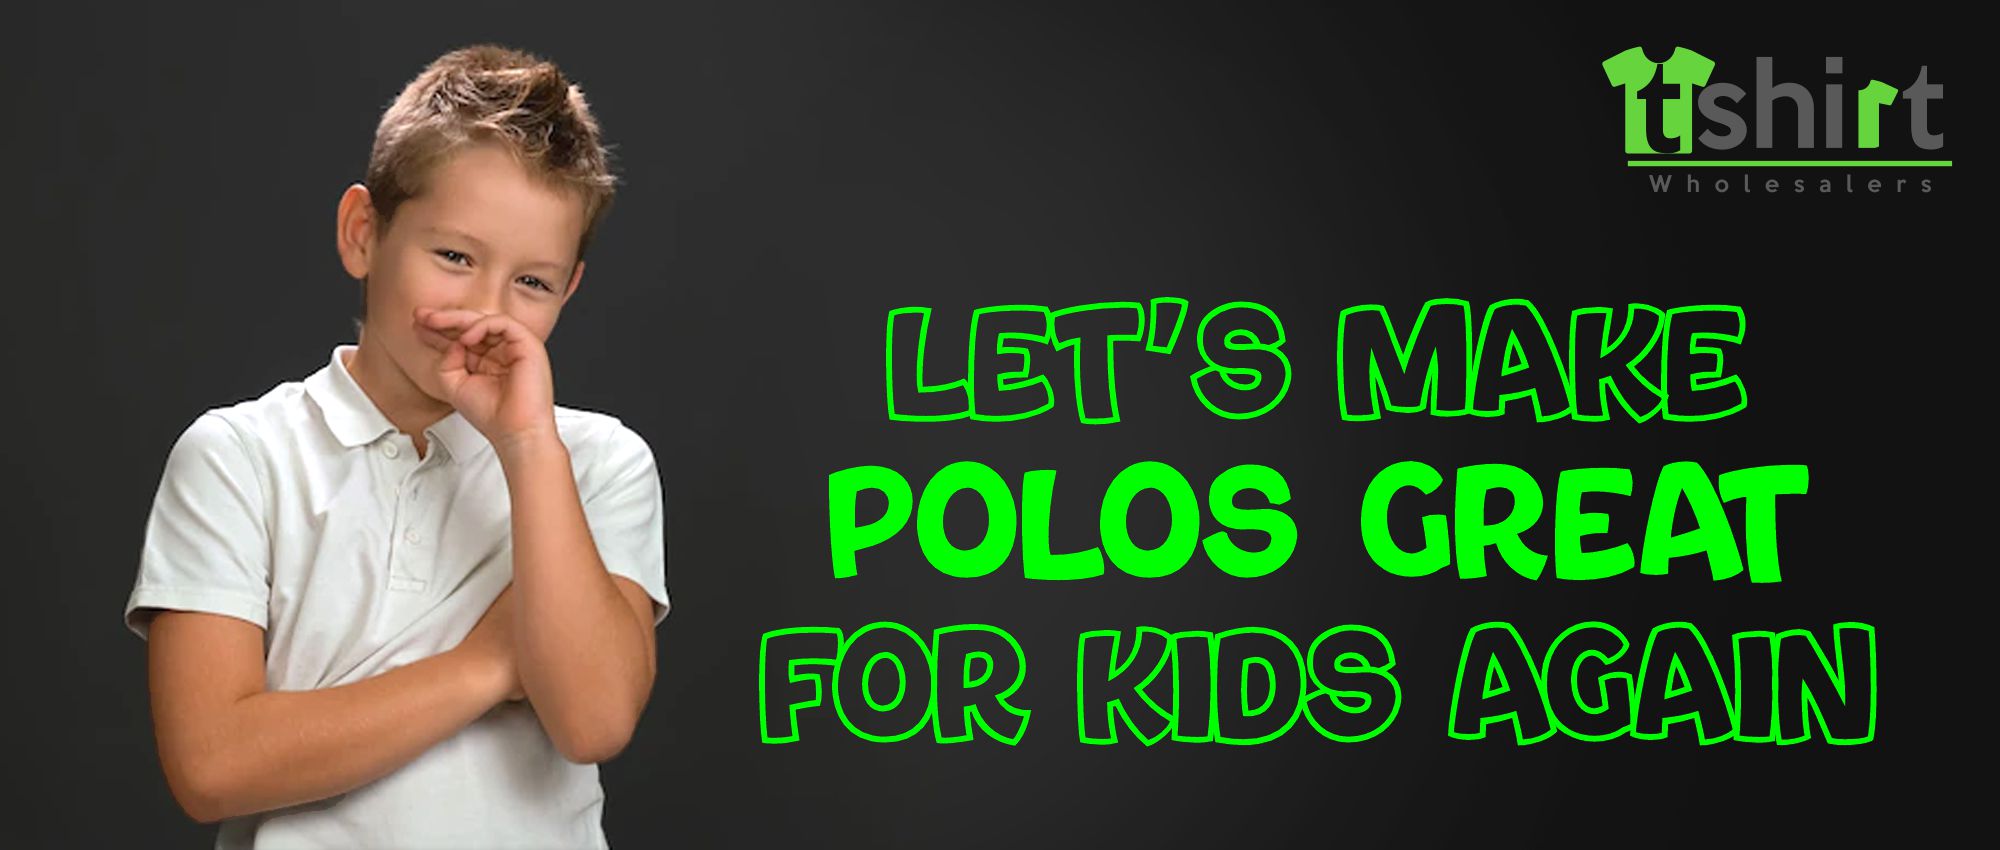 LET’S MAKE POLOS GREAT FOR KIDS AGAIN